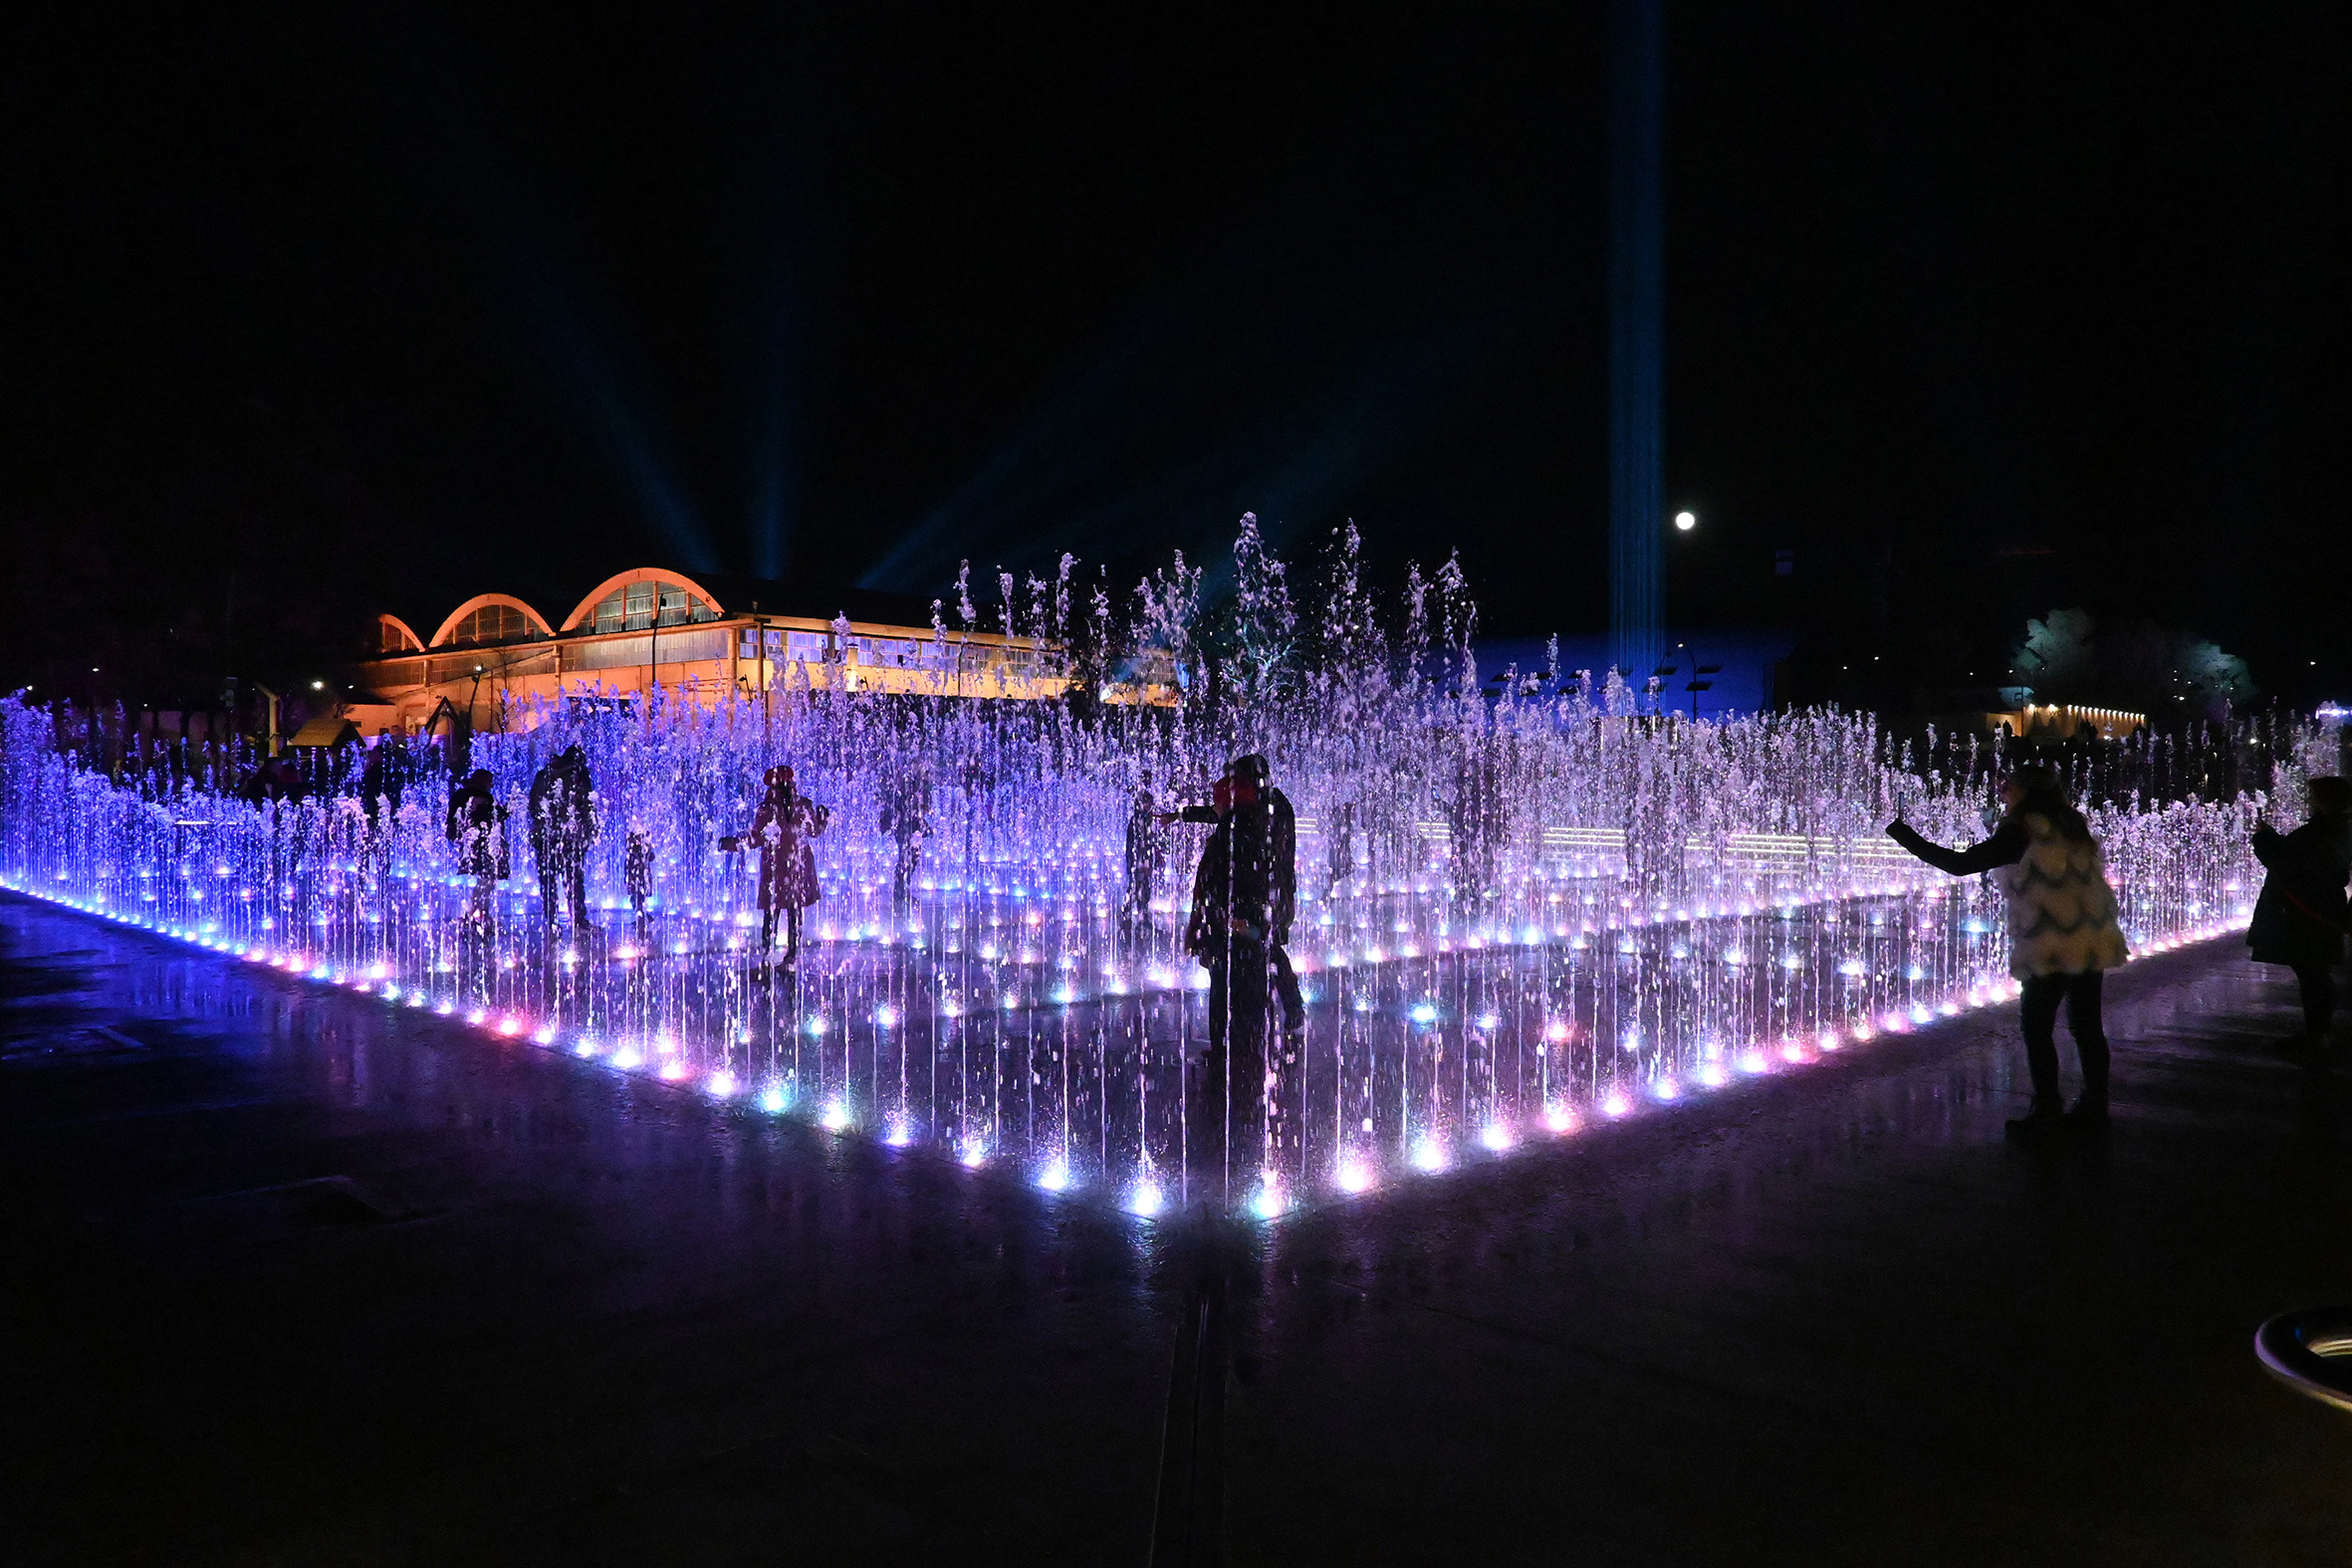 The fountains at the Experience Park, Ellinikon, Athens